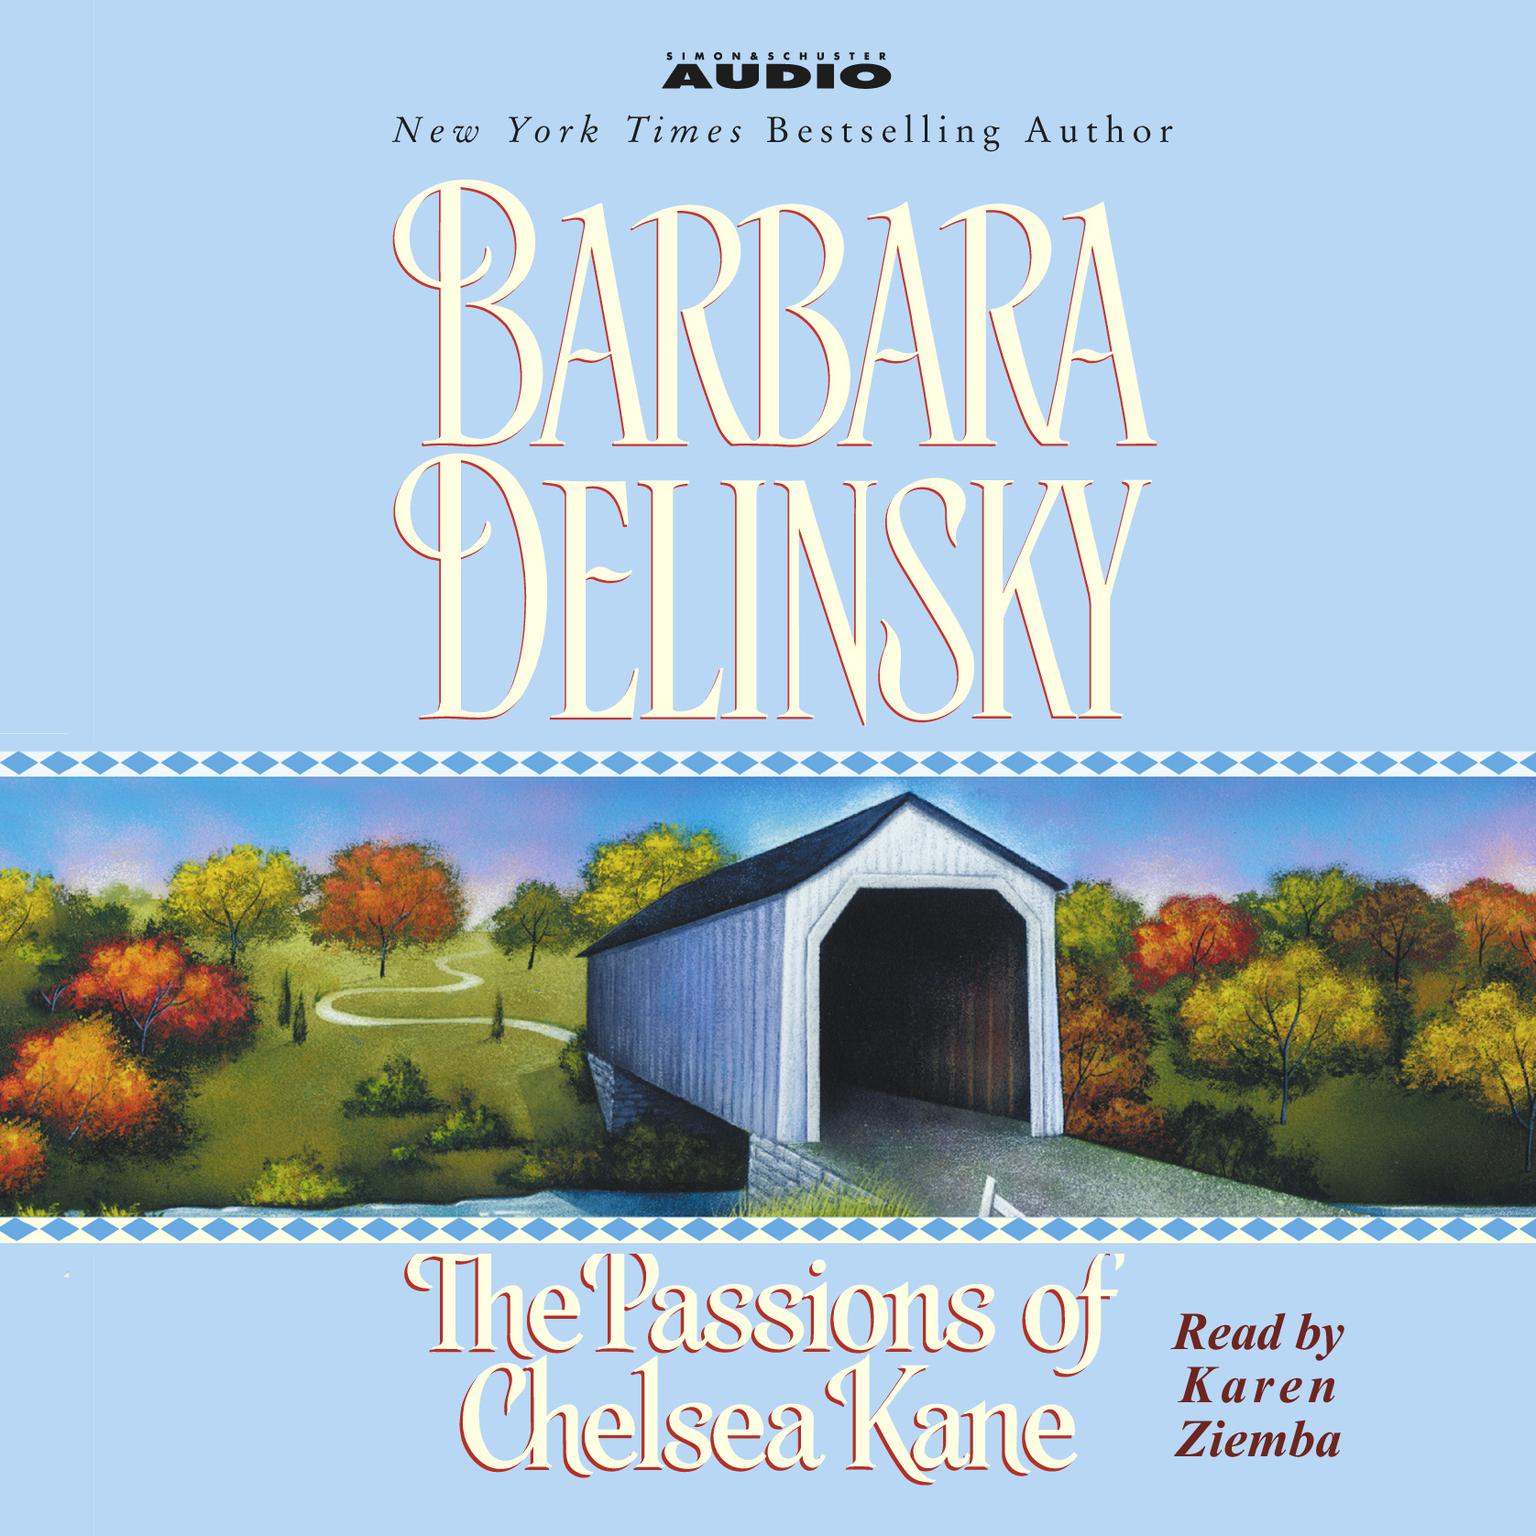 The Passions of Chelsea Kane (Abridged) Audiobook, by Barbara Delinsky